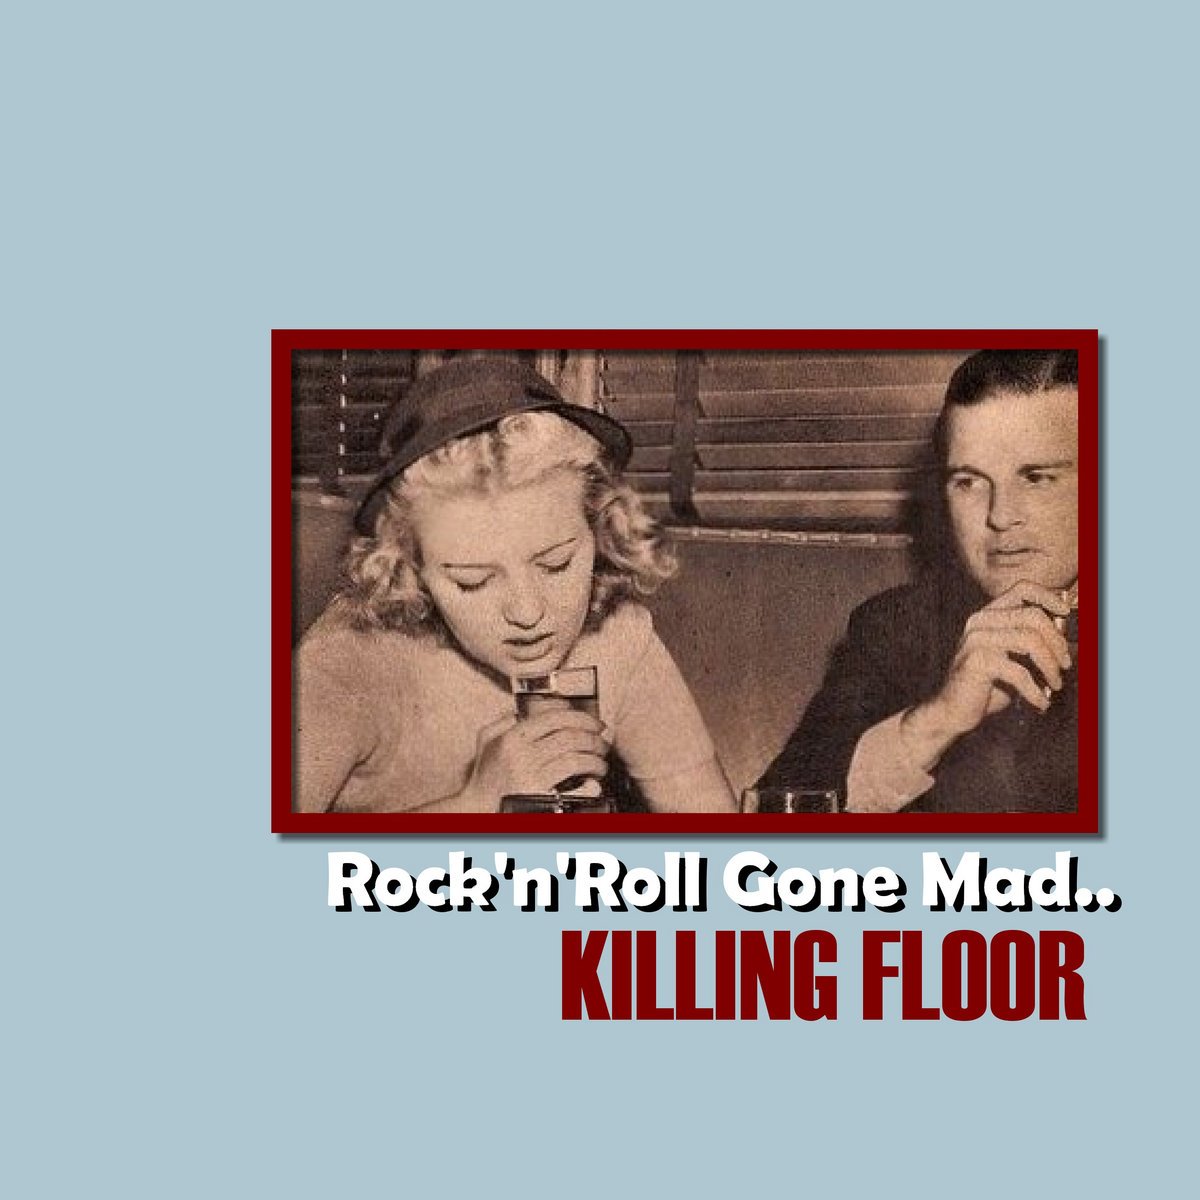 Killing my life. Killing Floor - Rock'n'Roll gone Mad - (2012) - CD Covers. Gone Mad. Trouble in my Life.